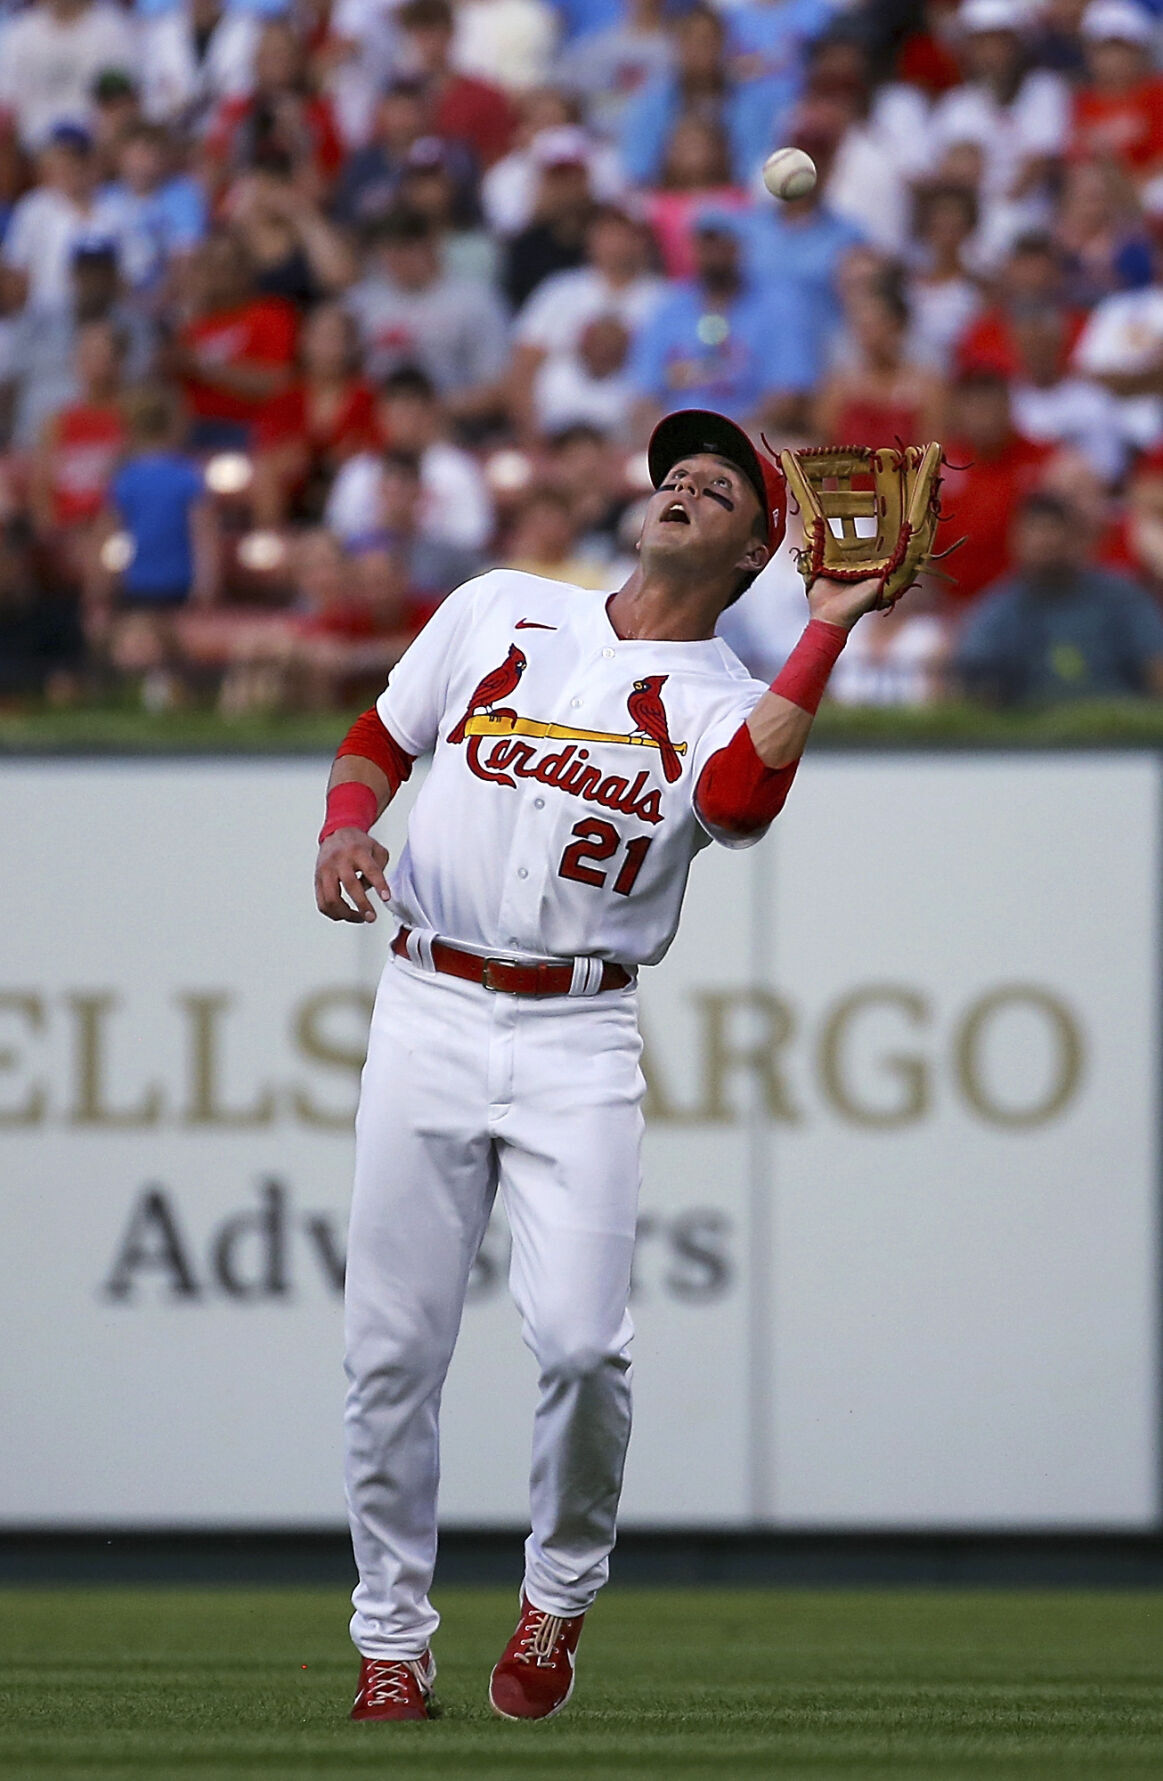 Patient' Dylan Carlson shows his range in wide-open center field race:  Cardinals Extra